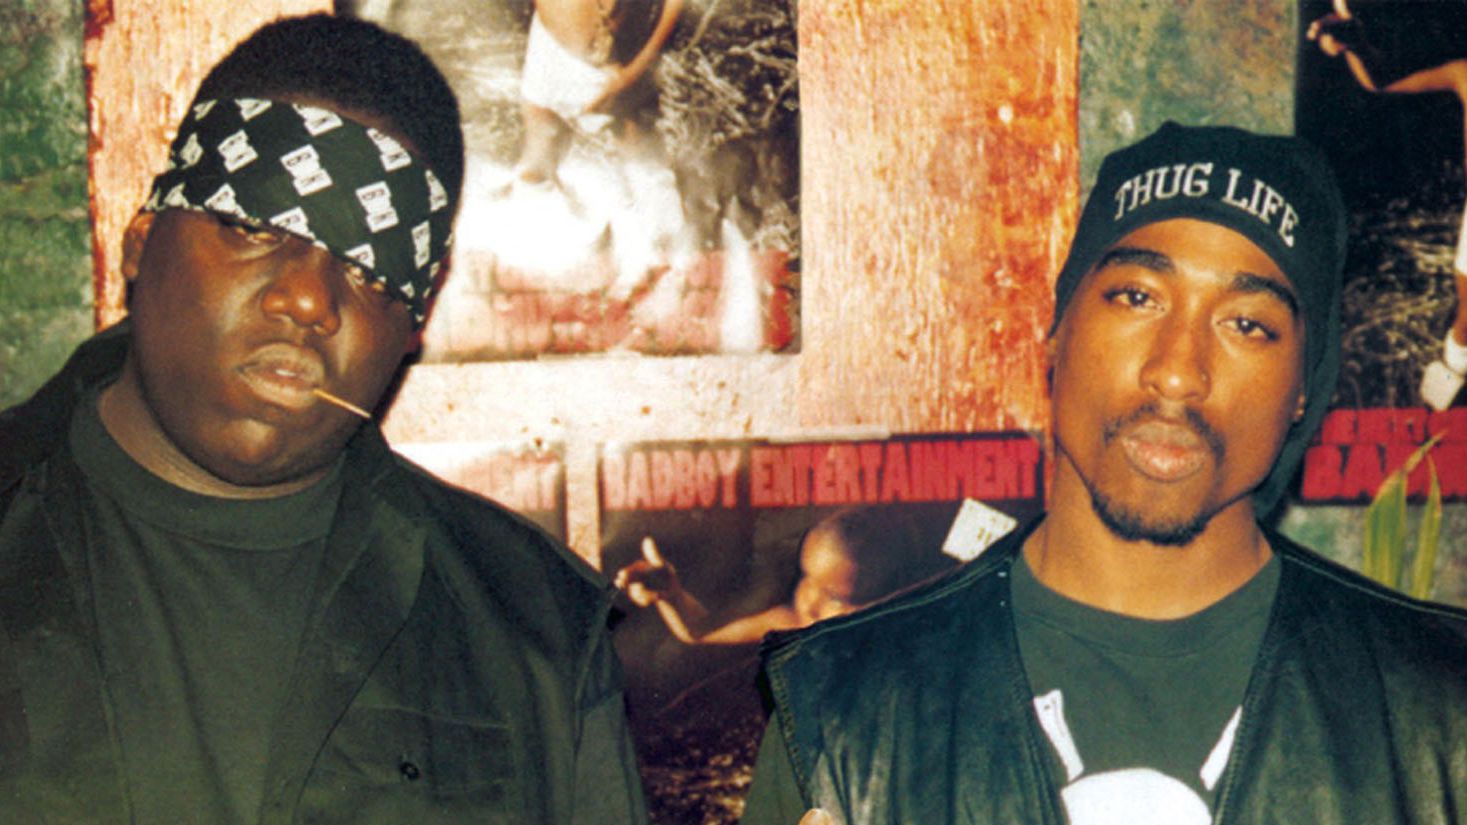 What happened with Tupac and Biggie?